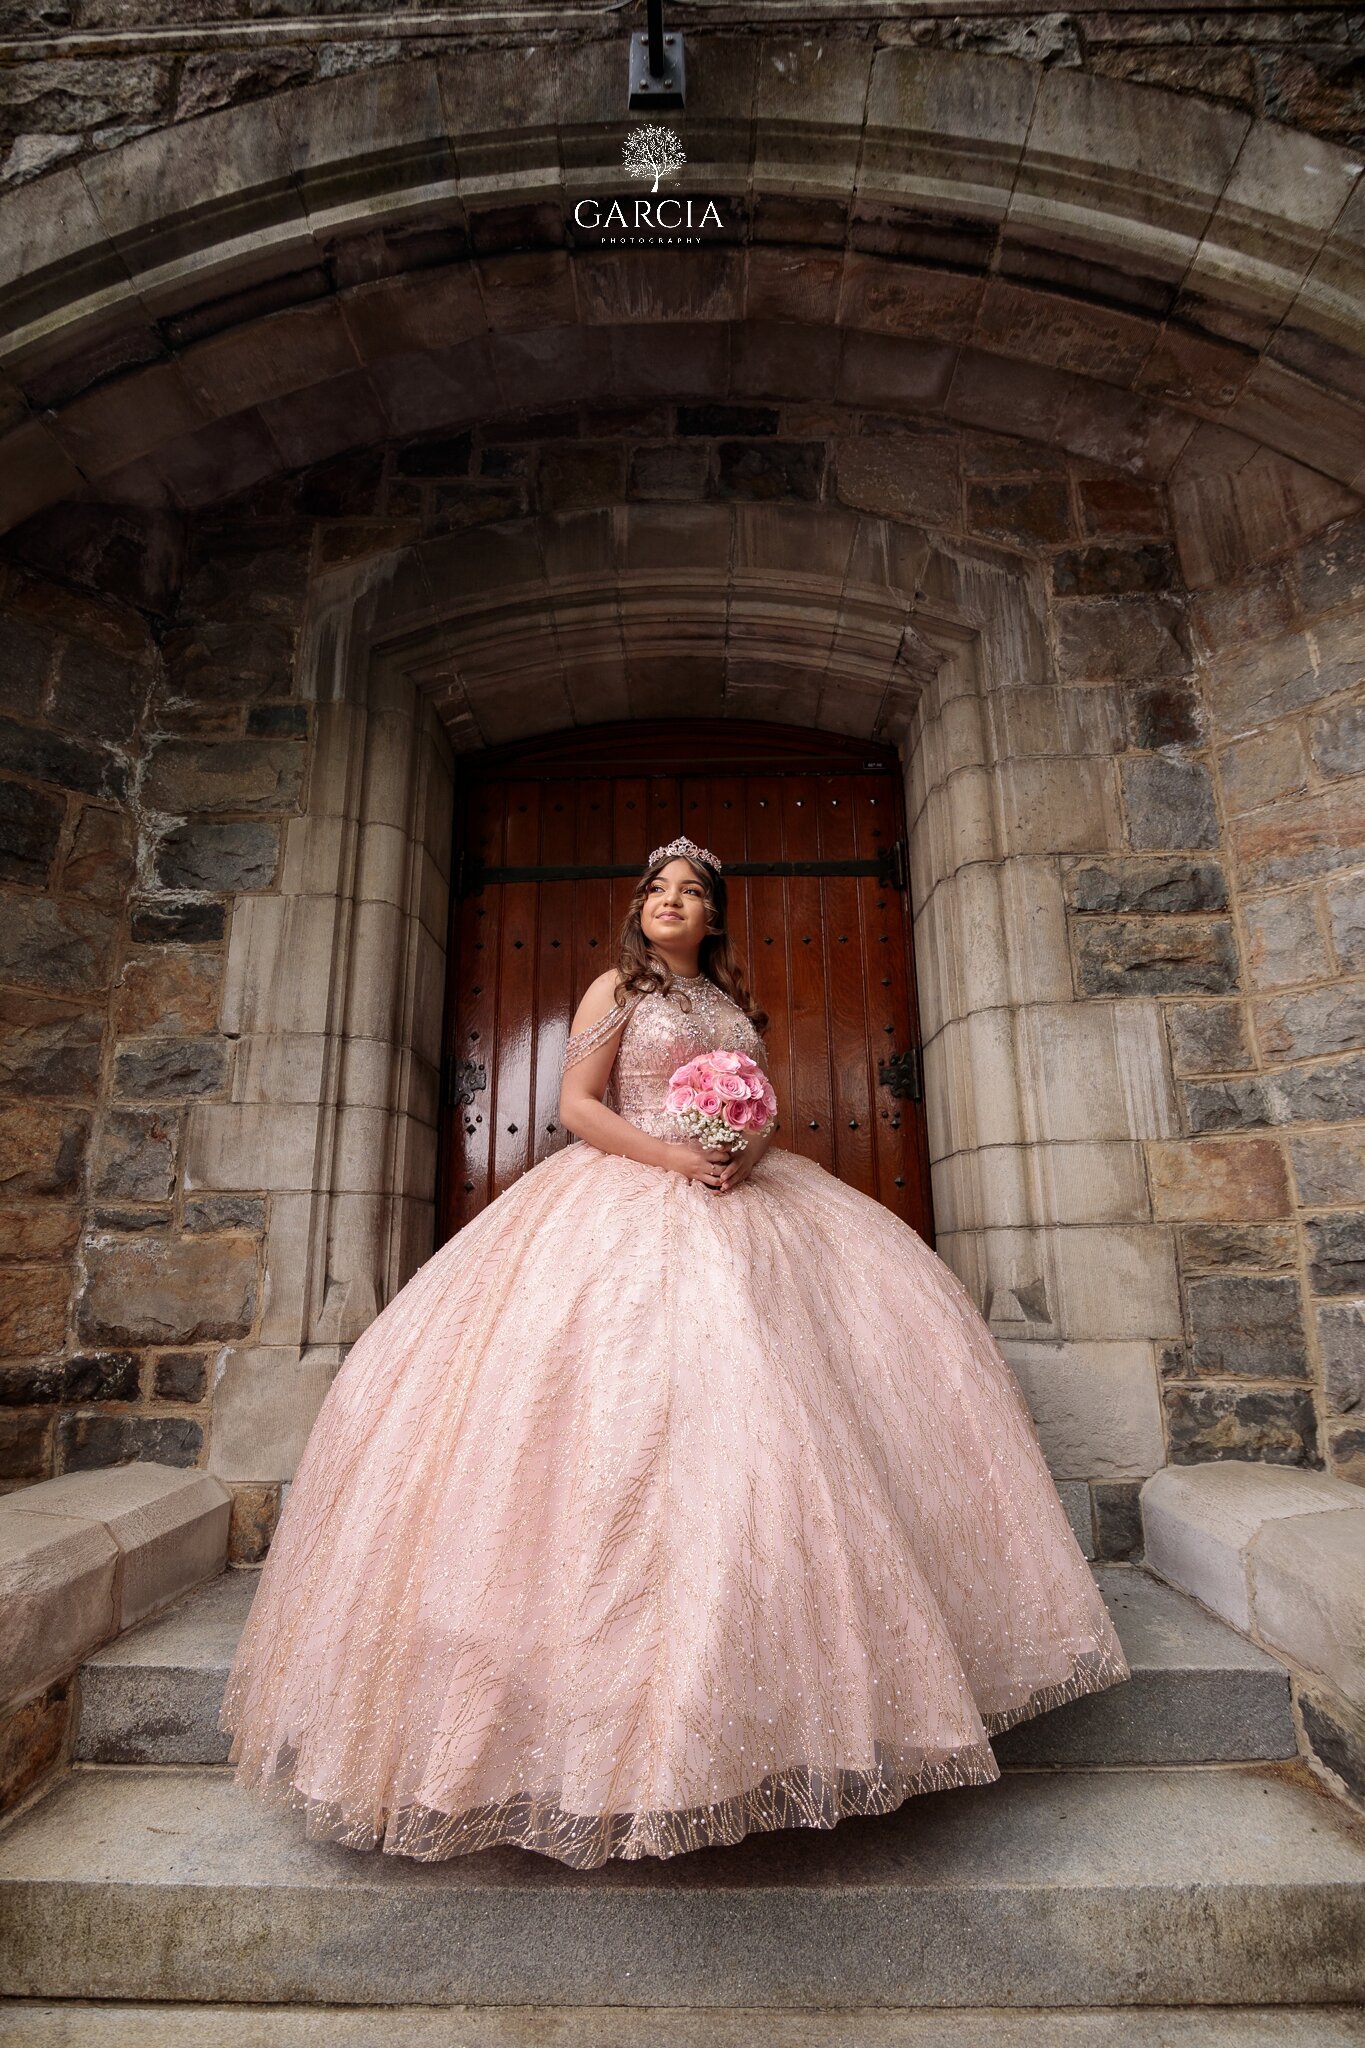 Alana-Quince-Session-Garcia-Photography-2238.jpg